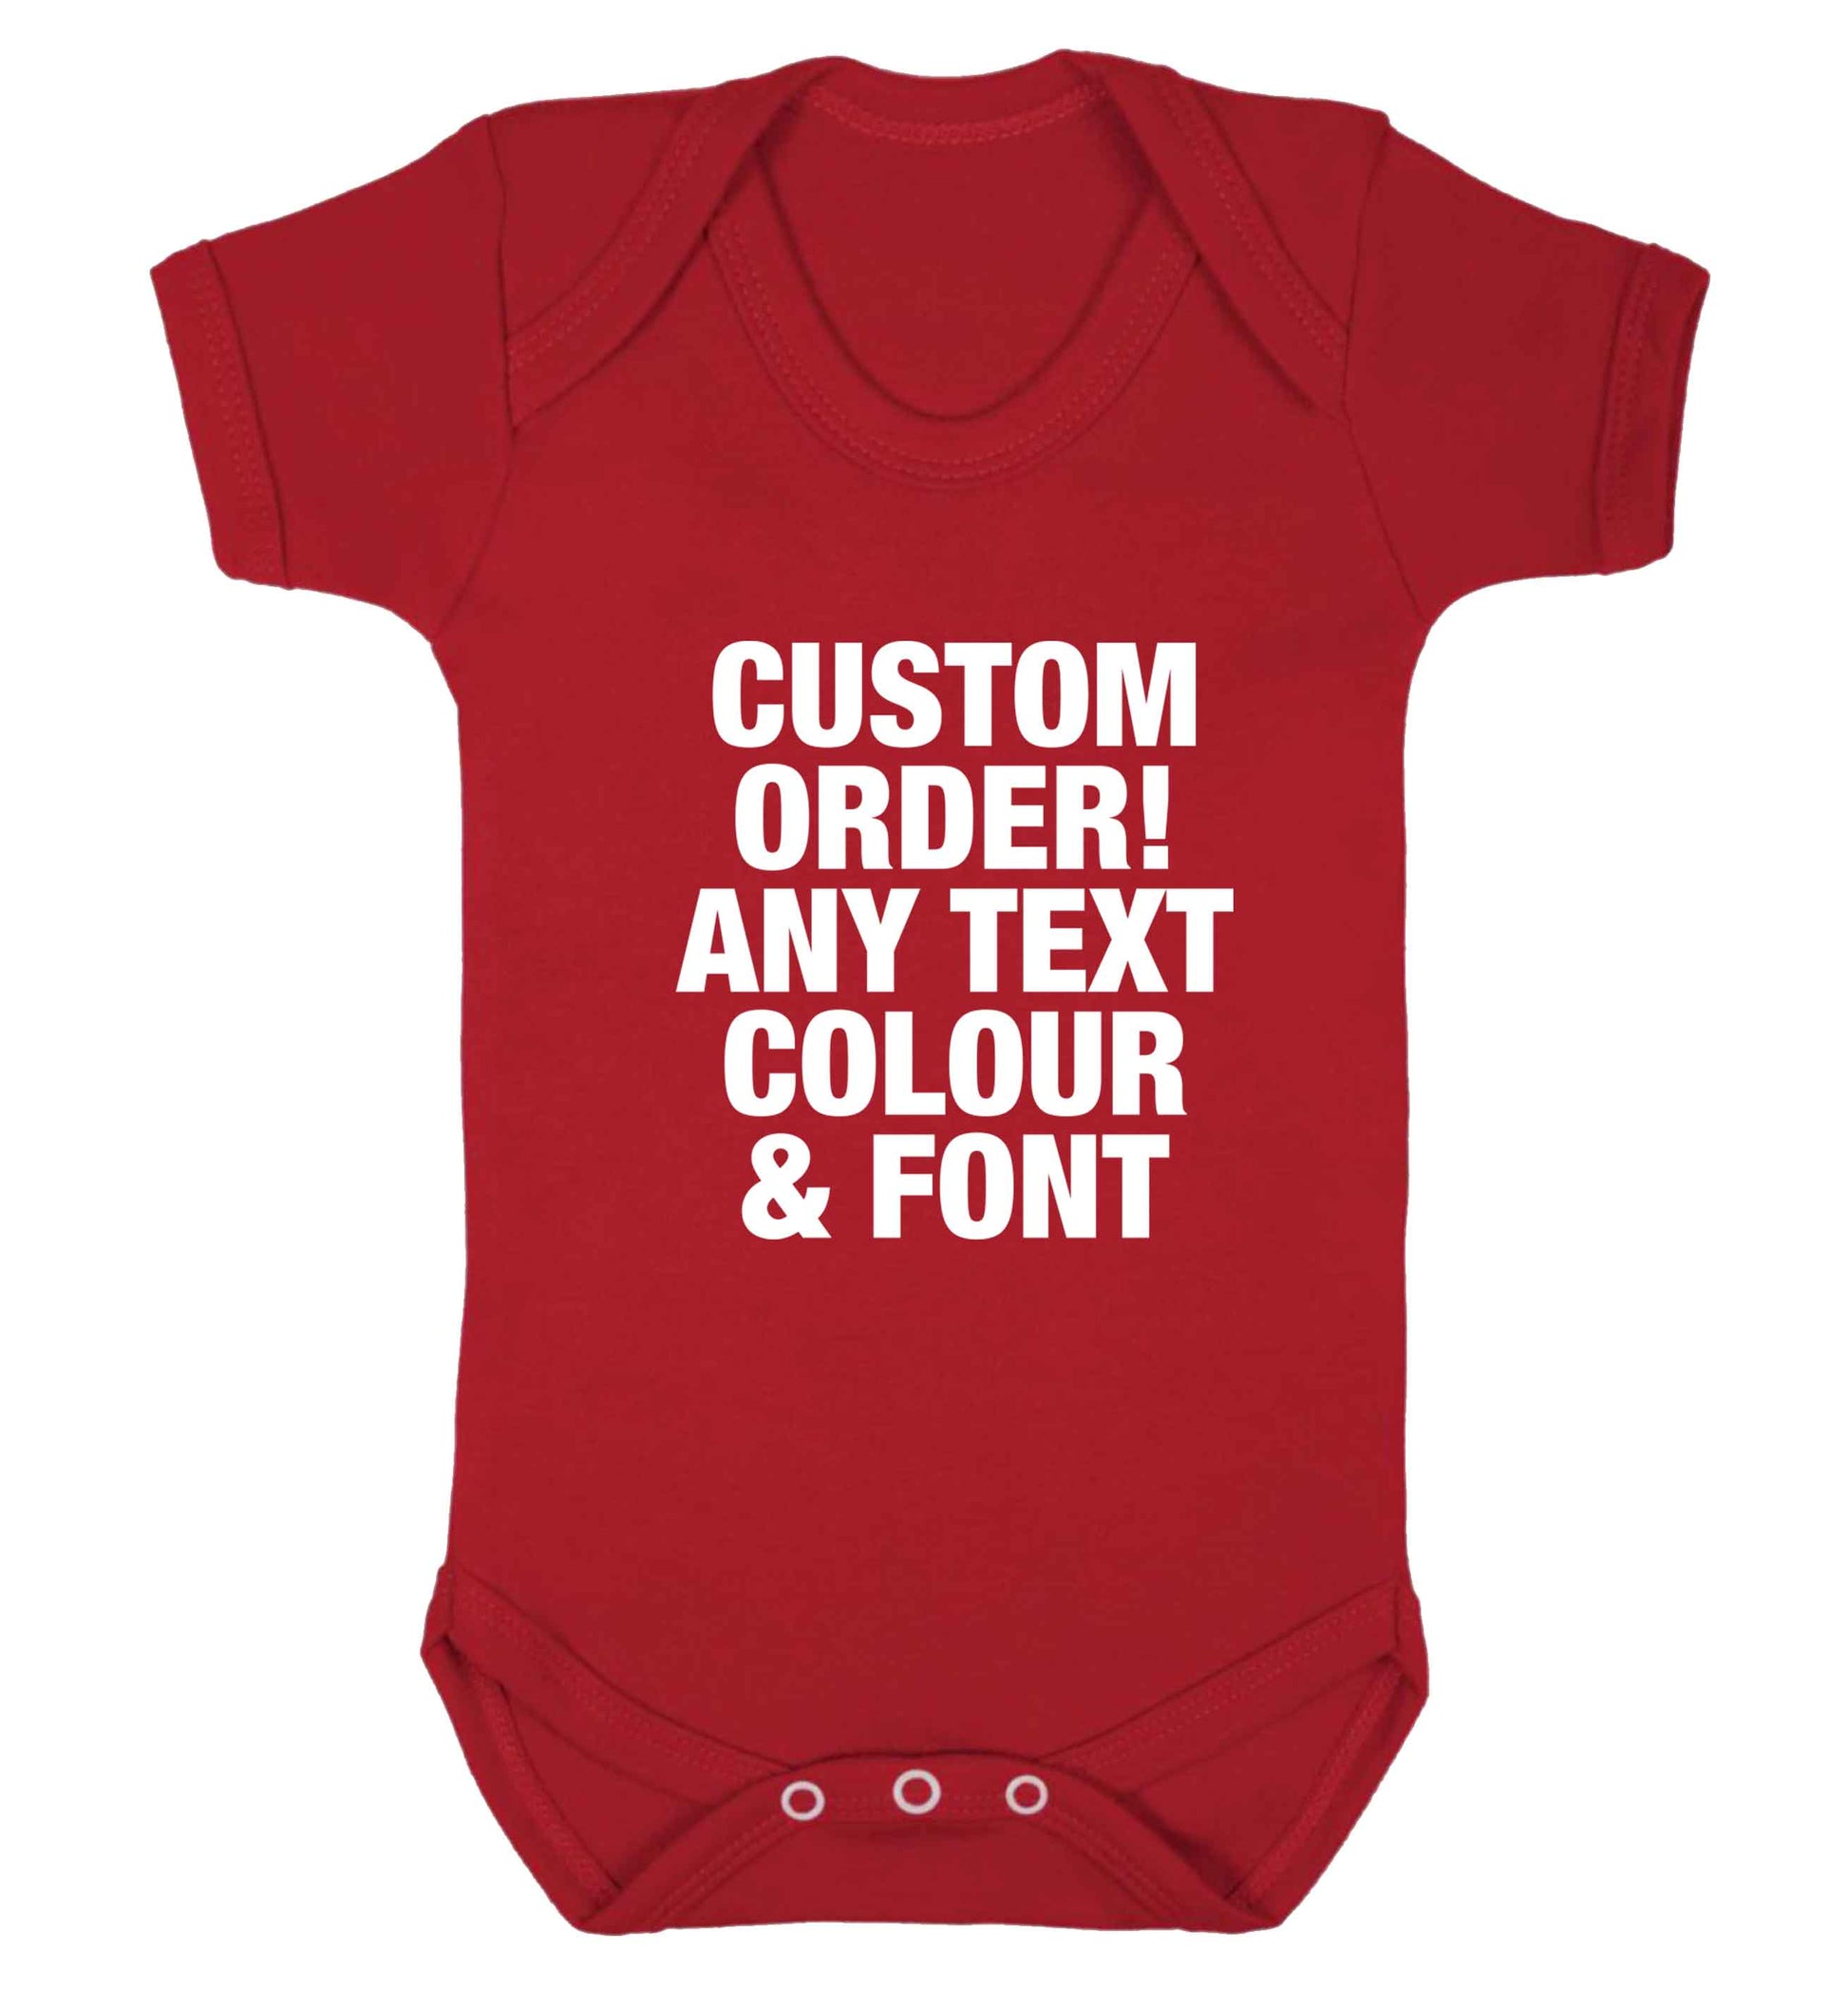 Custom order any text colour and font baby vest red 18-24 months